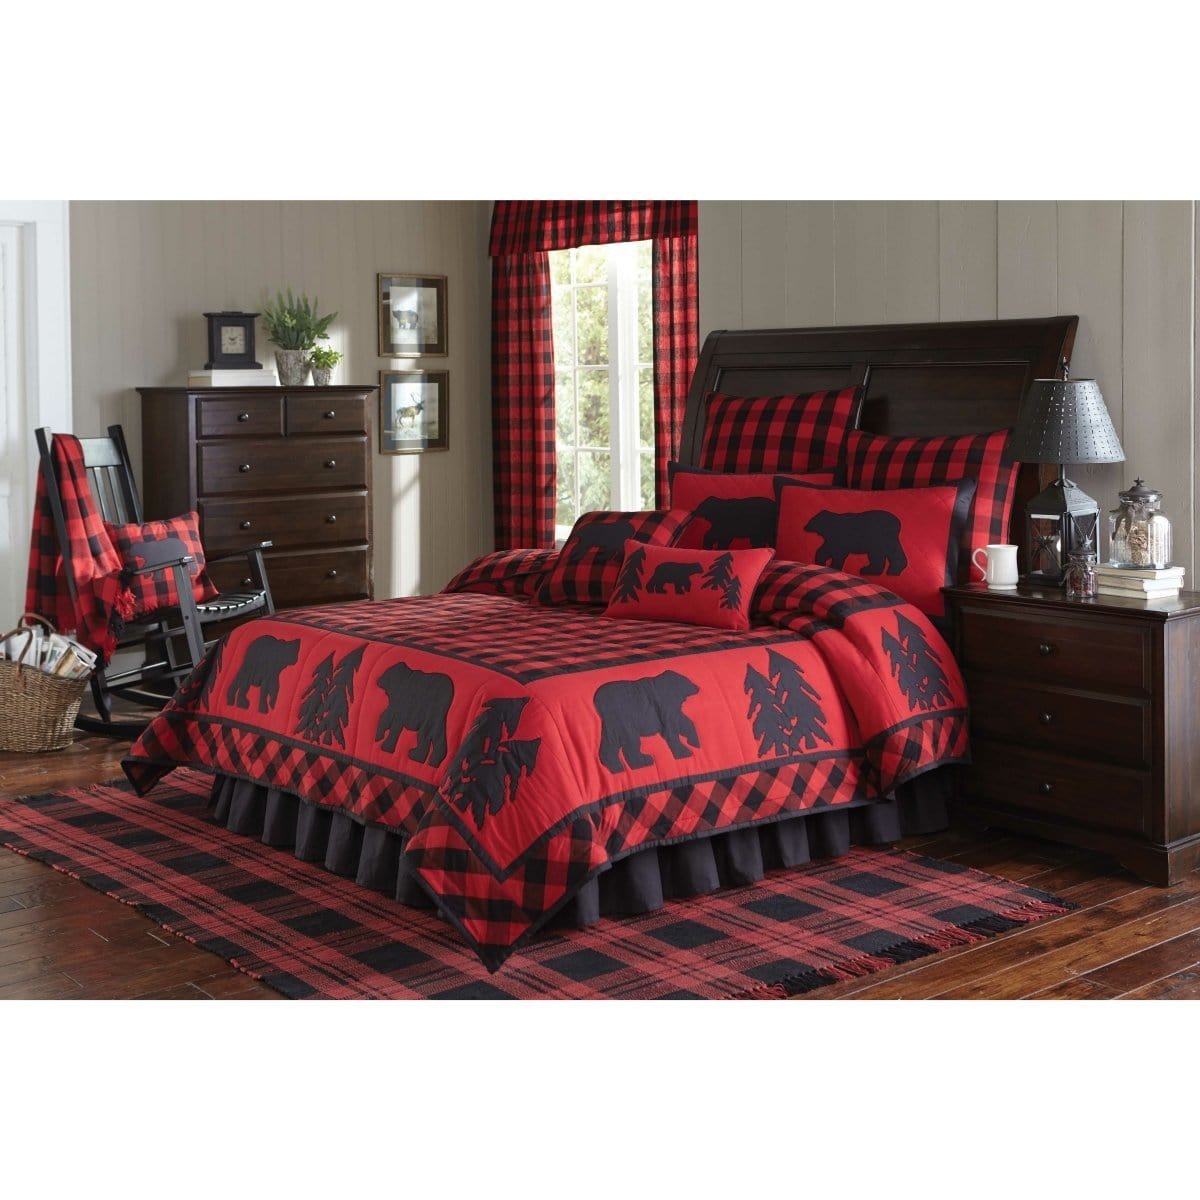 Buffalo Check Panel Pair With Tie Backs 84&quot; Long Lined-Park Designs-The Village Merchant